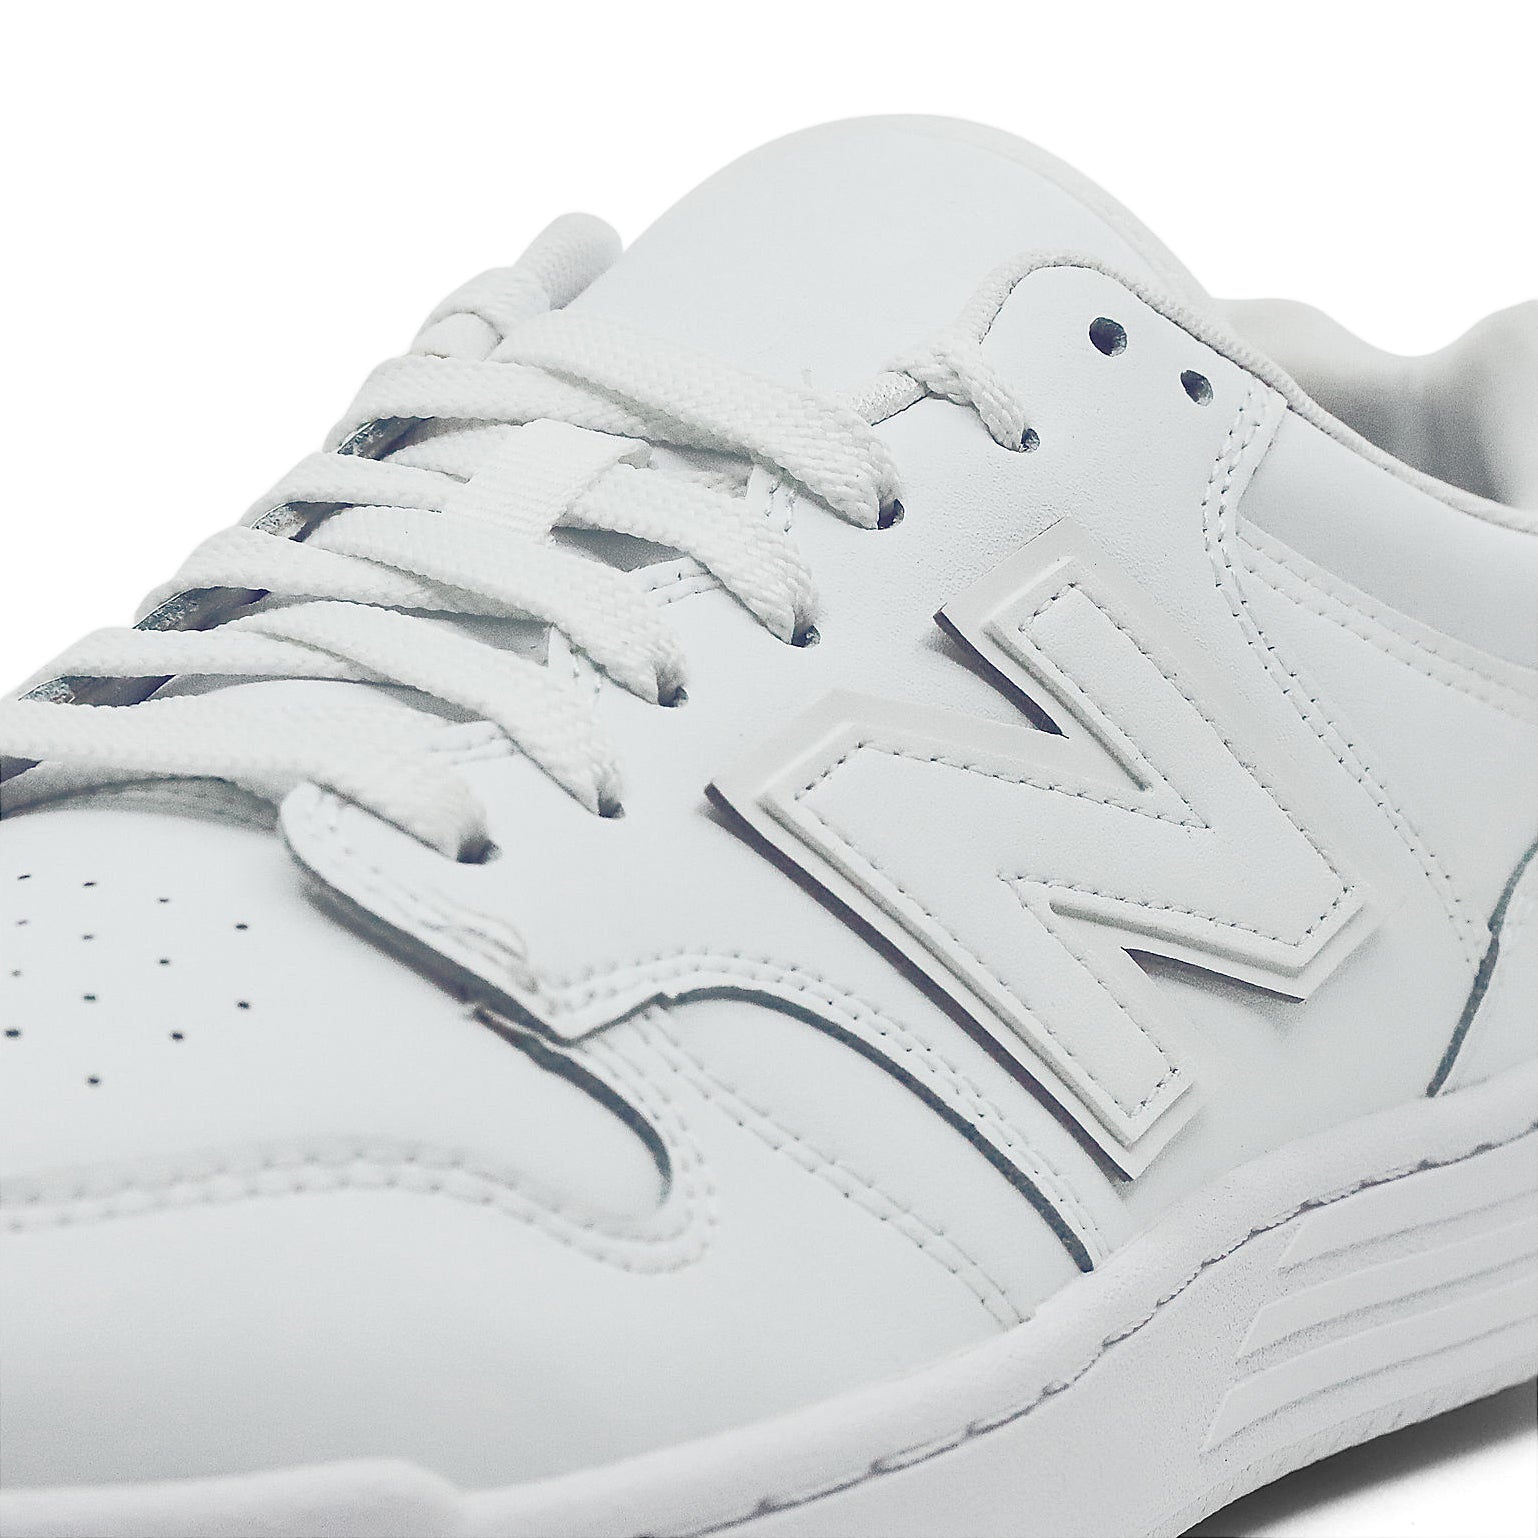 A monochrome white leather basketball sneaker from New Balance.